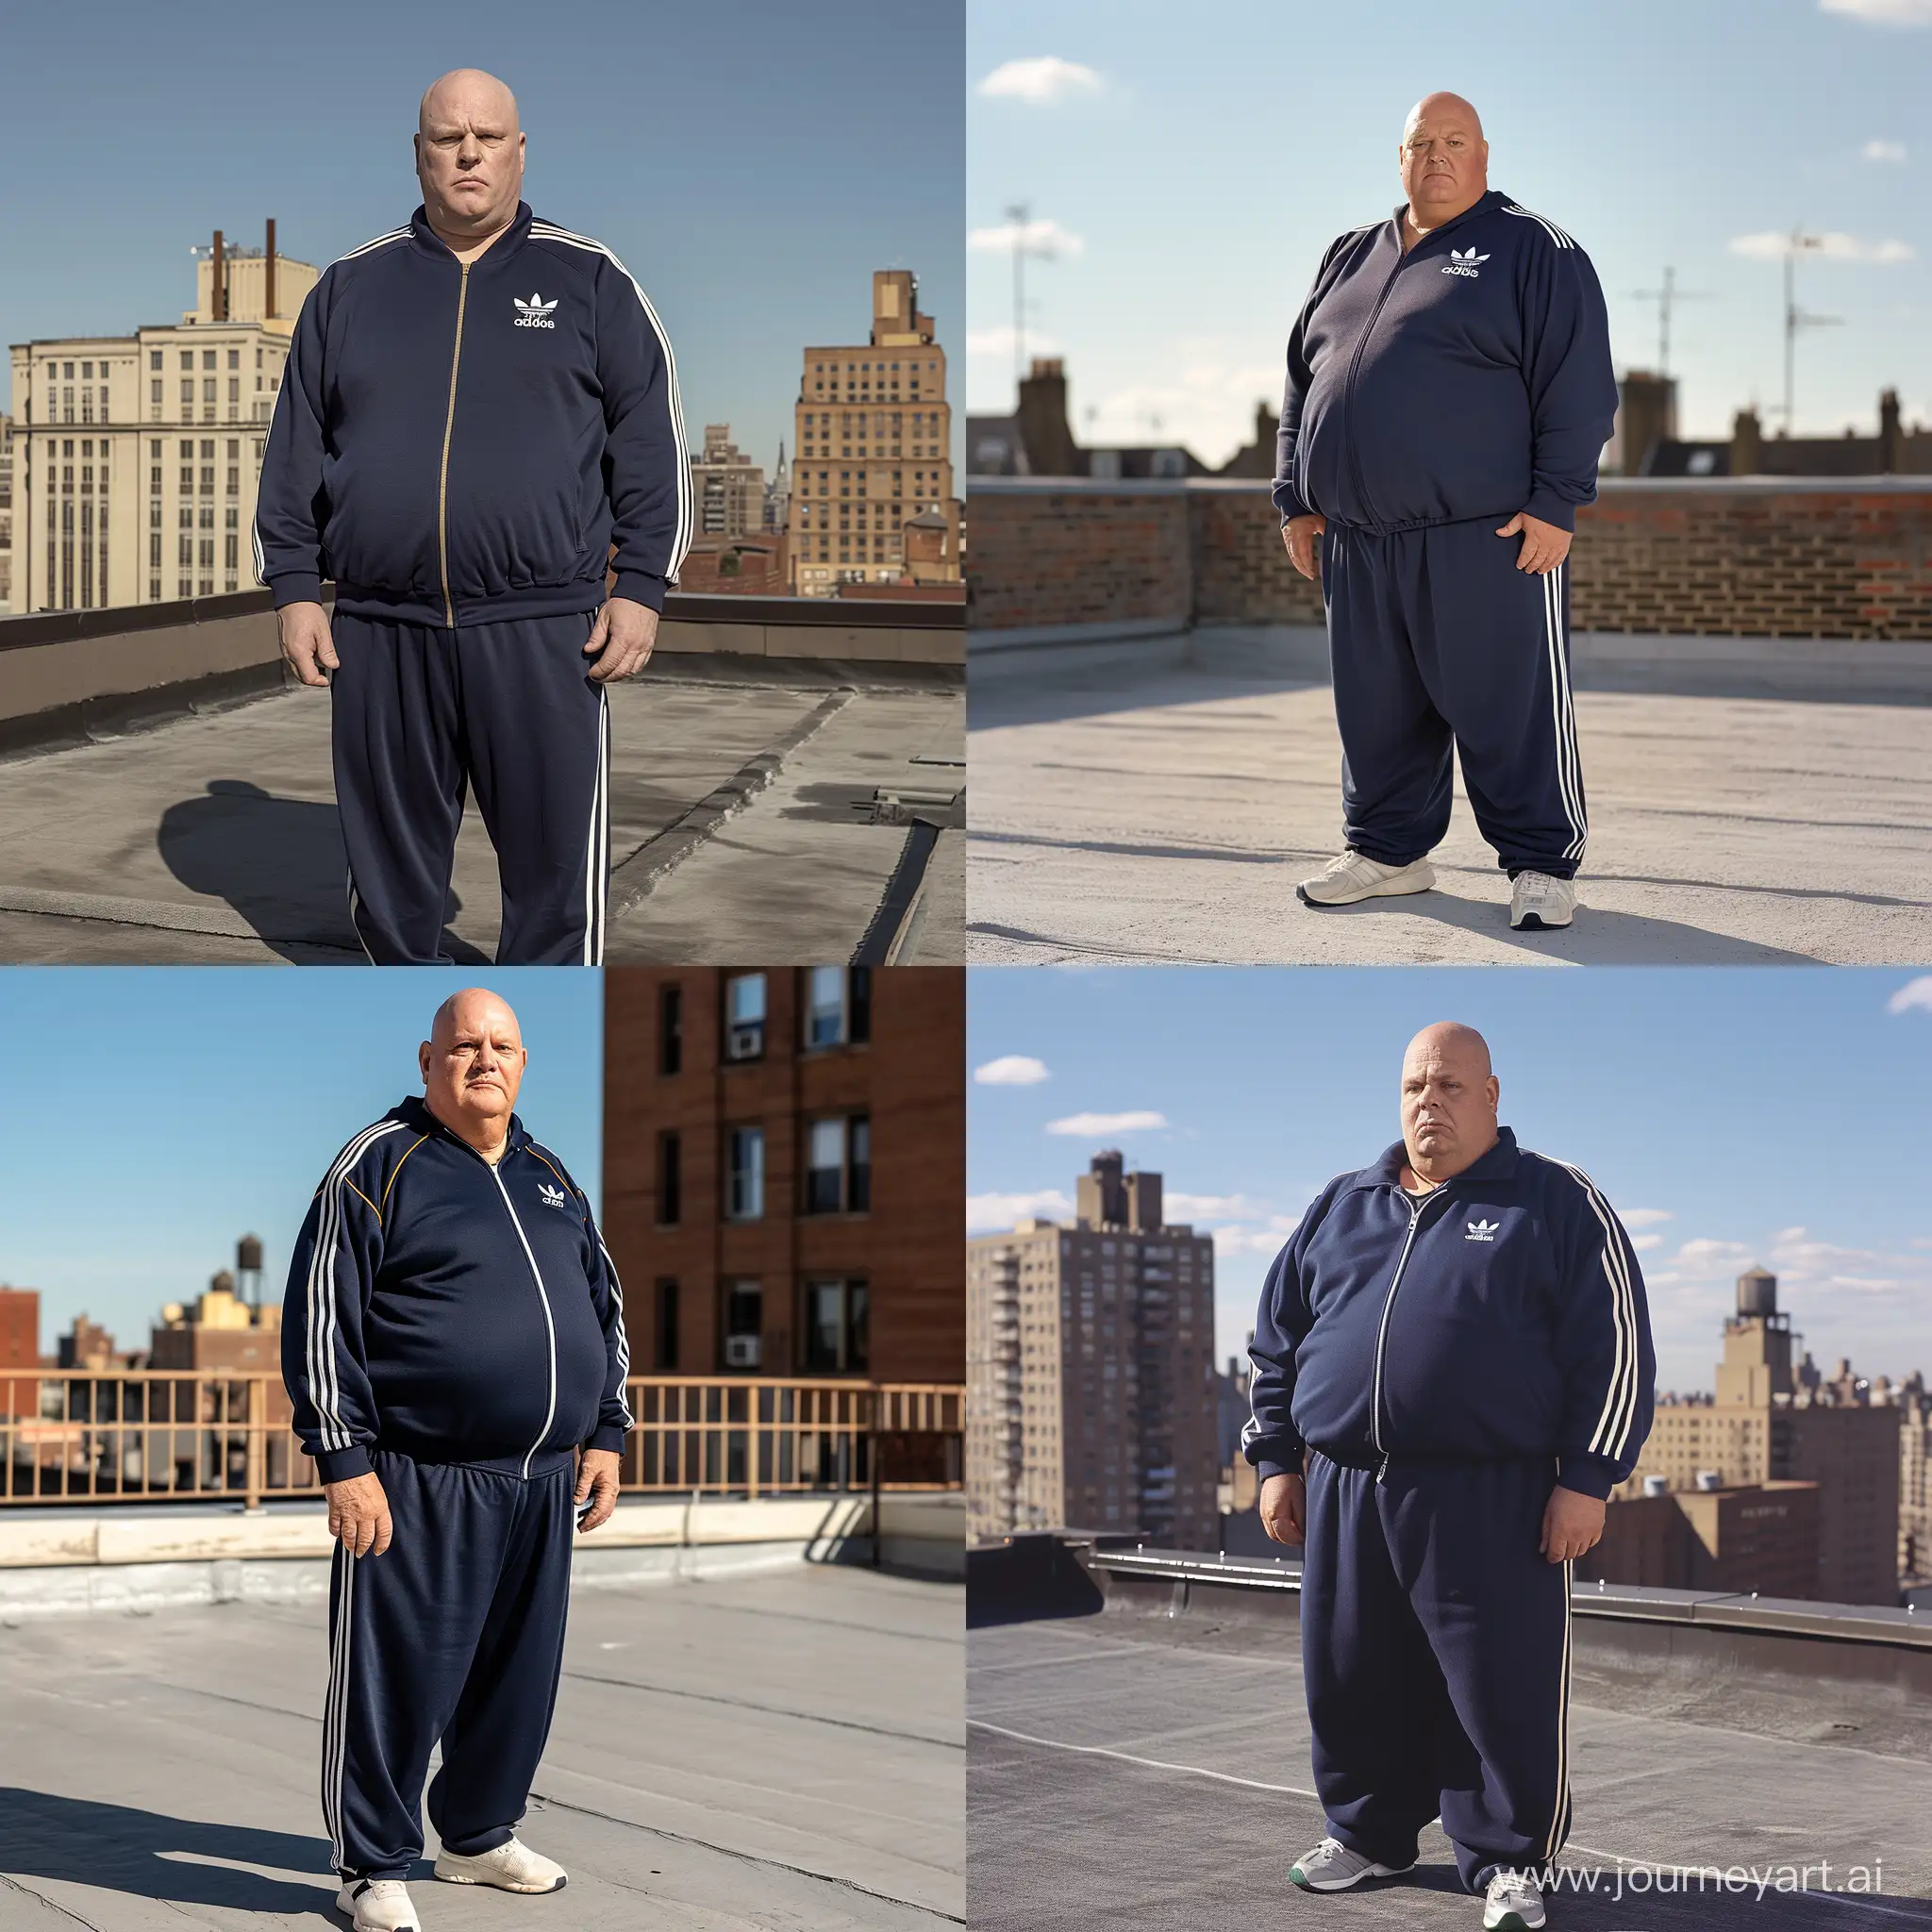 overweight man aged 70 wearing a navy adidas tracksuit, rooftop, daylight, clean shaven, bald --v 6